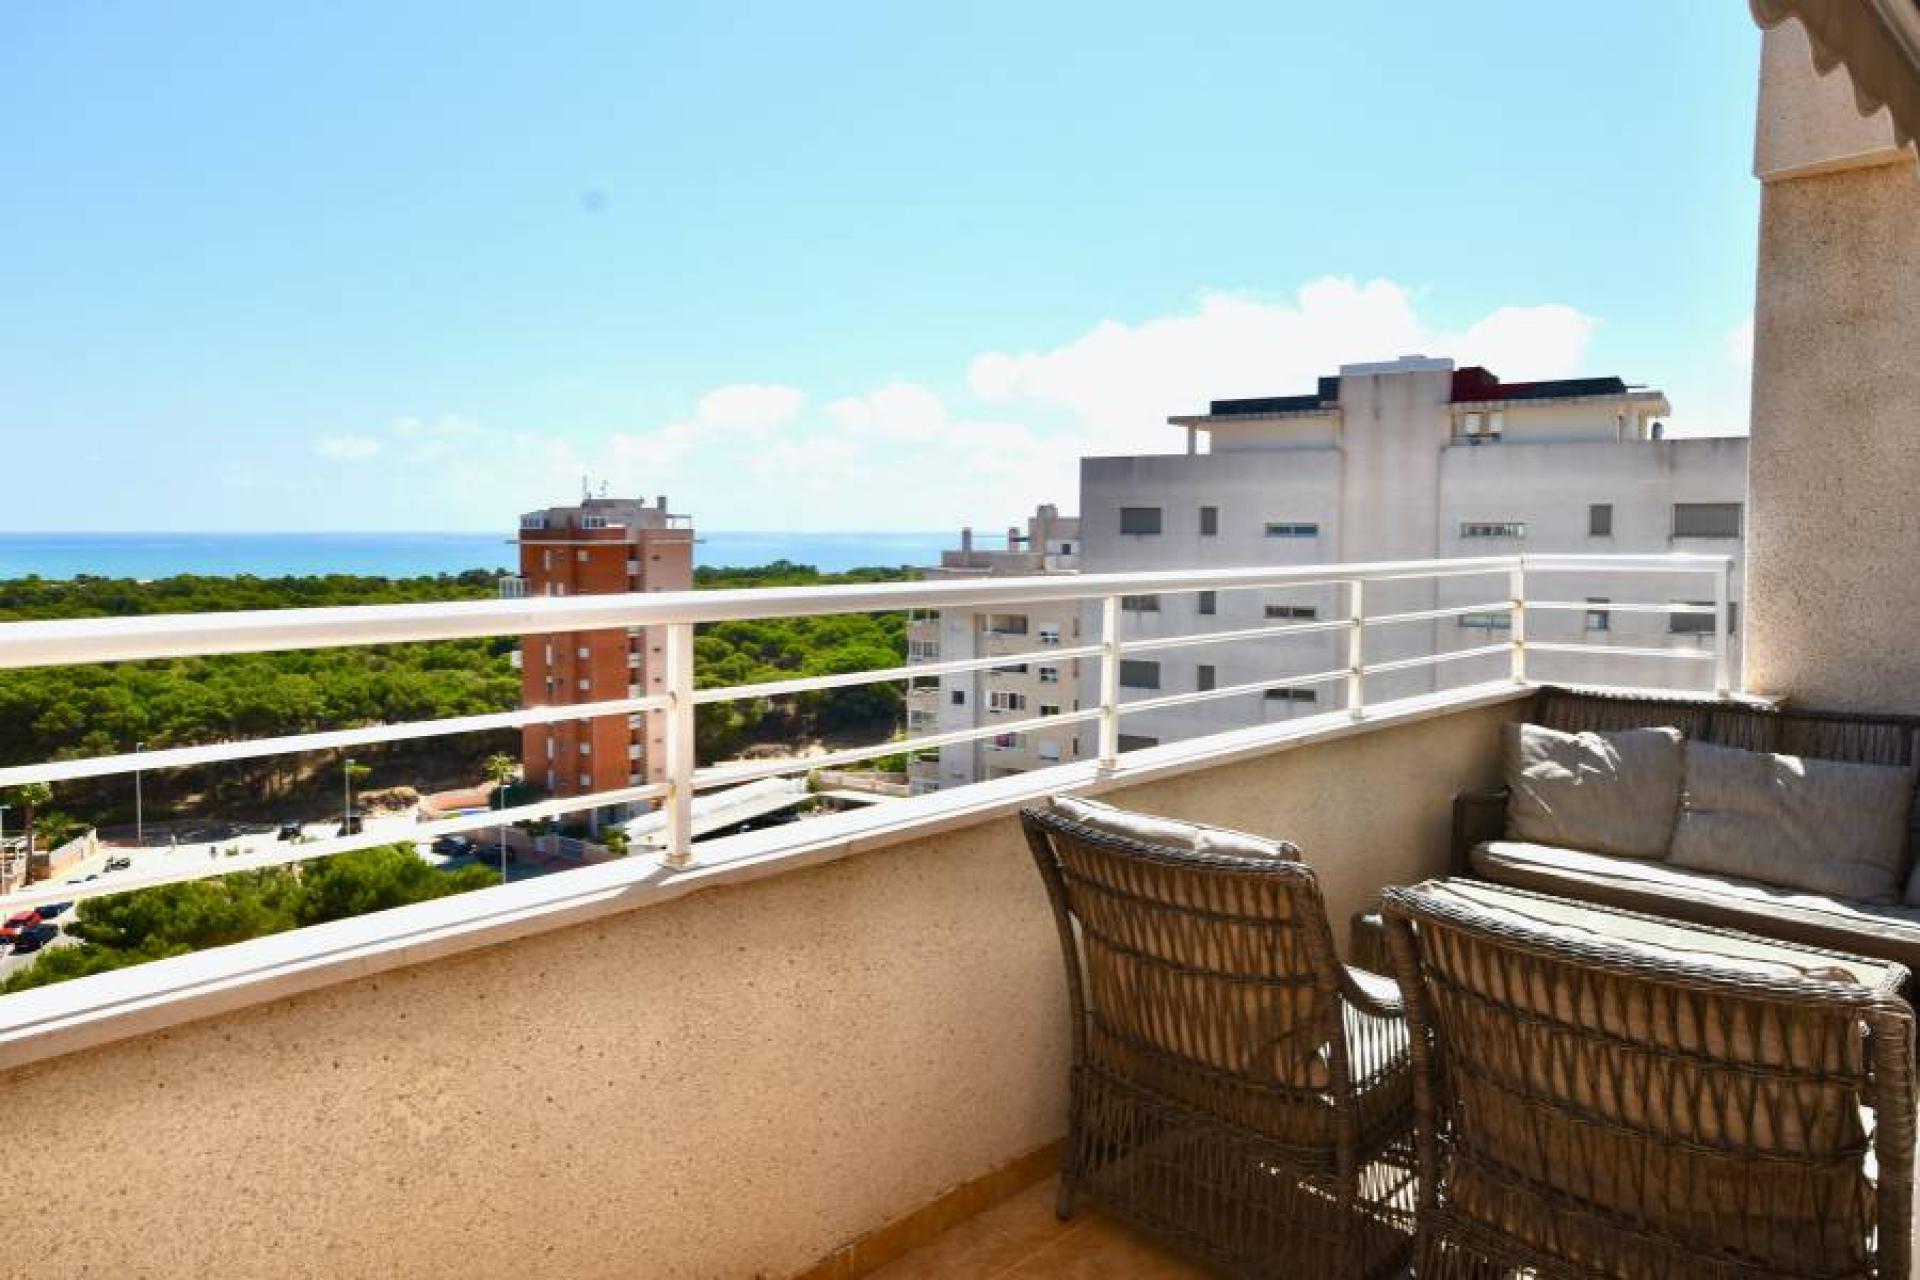 Guardamar, Penthouse with 3 Bedrooms 2 Bathrooms, 15m2 terrace and 24m2 private solarium